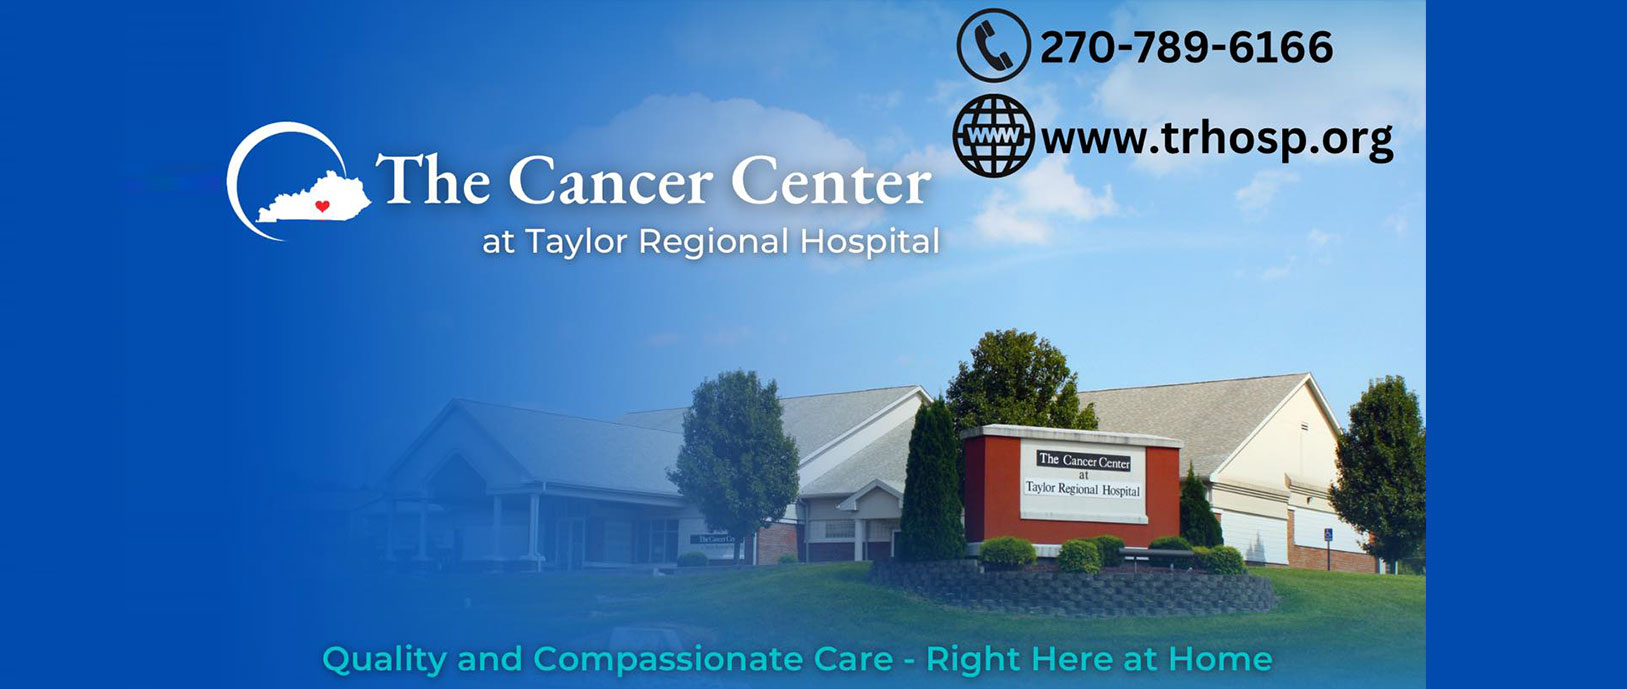 The Cancer Center at Taylor Regional Hospital
Quality and Compassionate Care right here at home
270-789-6166
www.trhosp.org